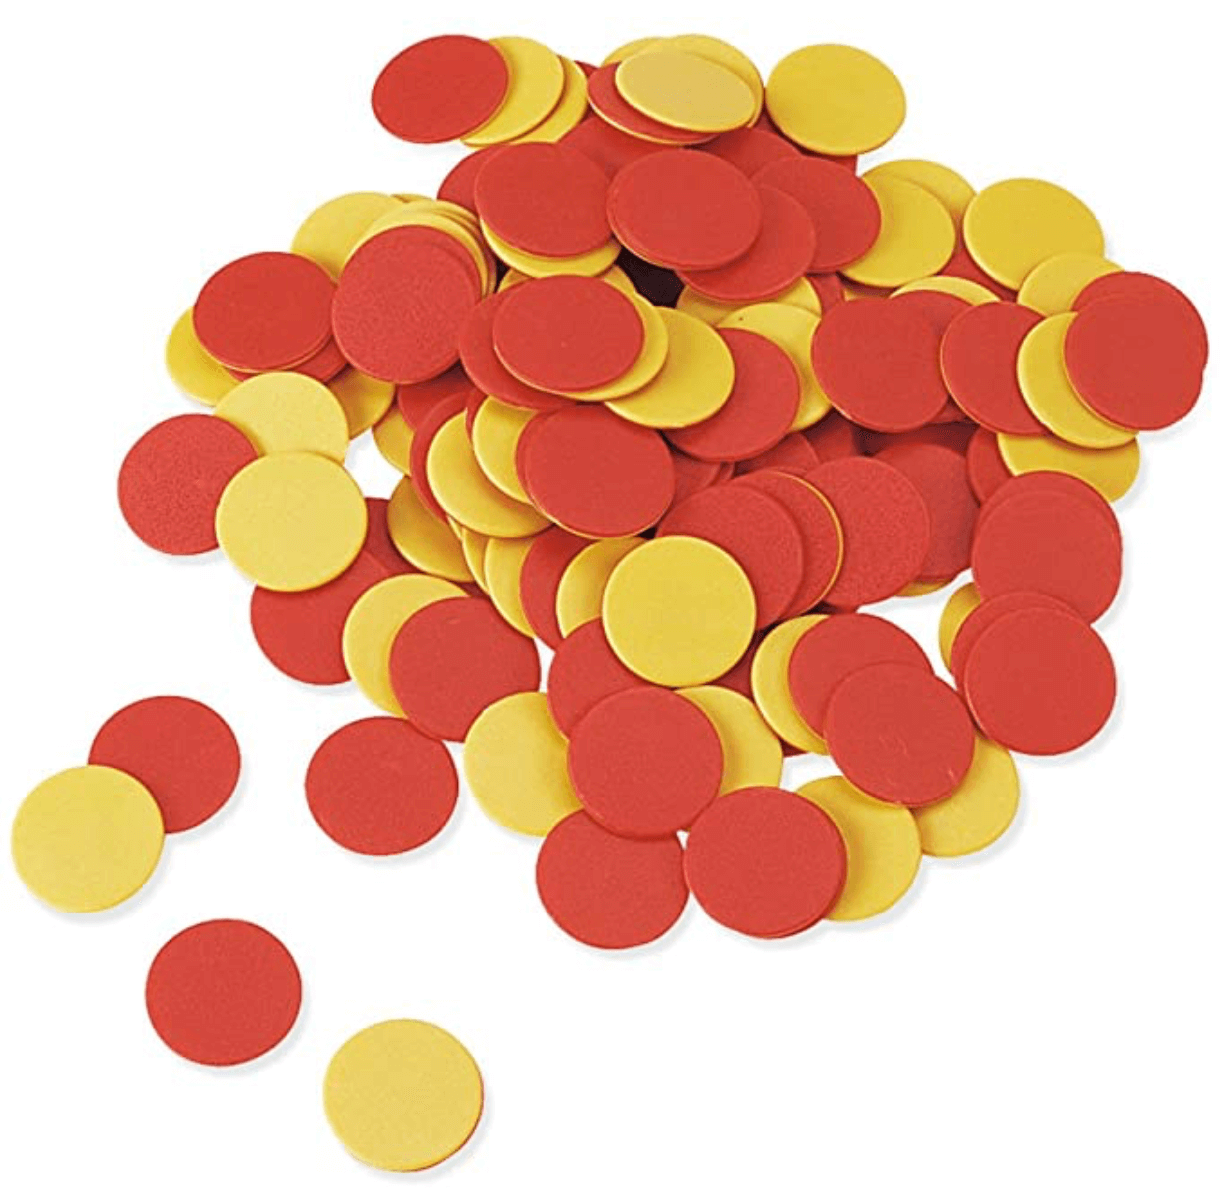 TWO COLOR COUNTING CHIPS